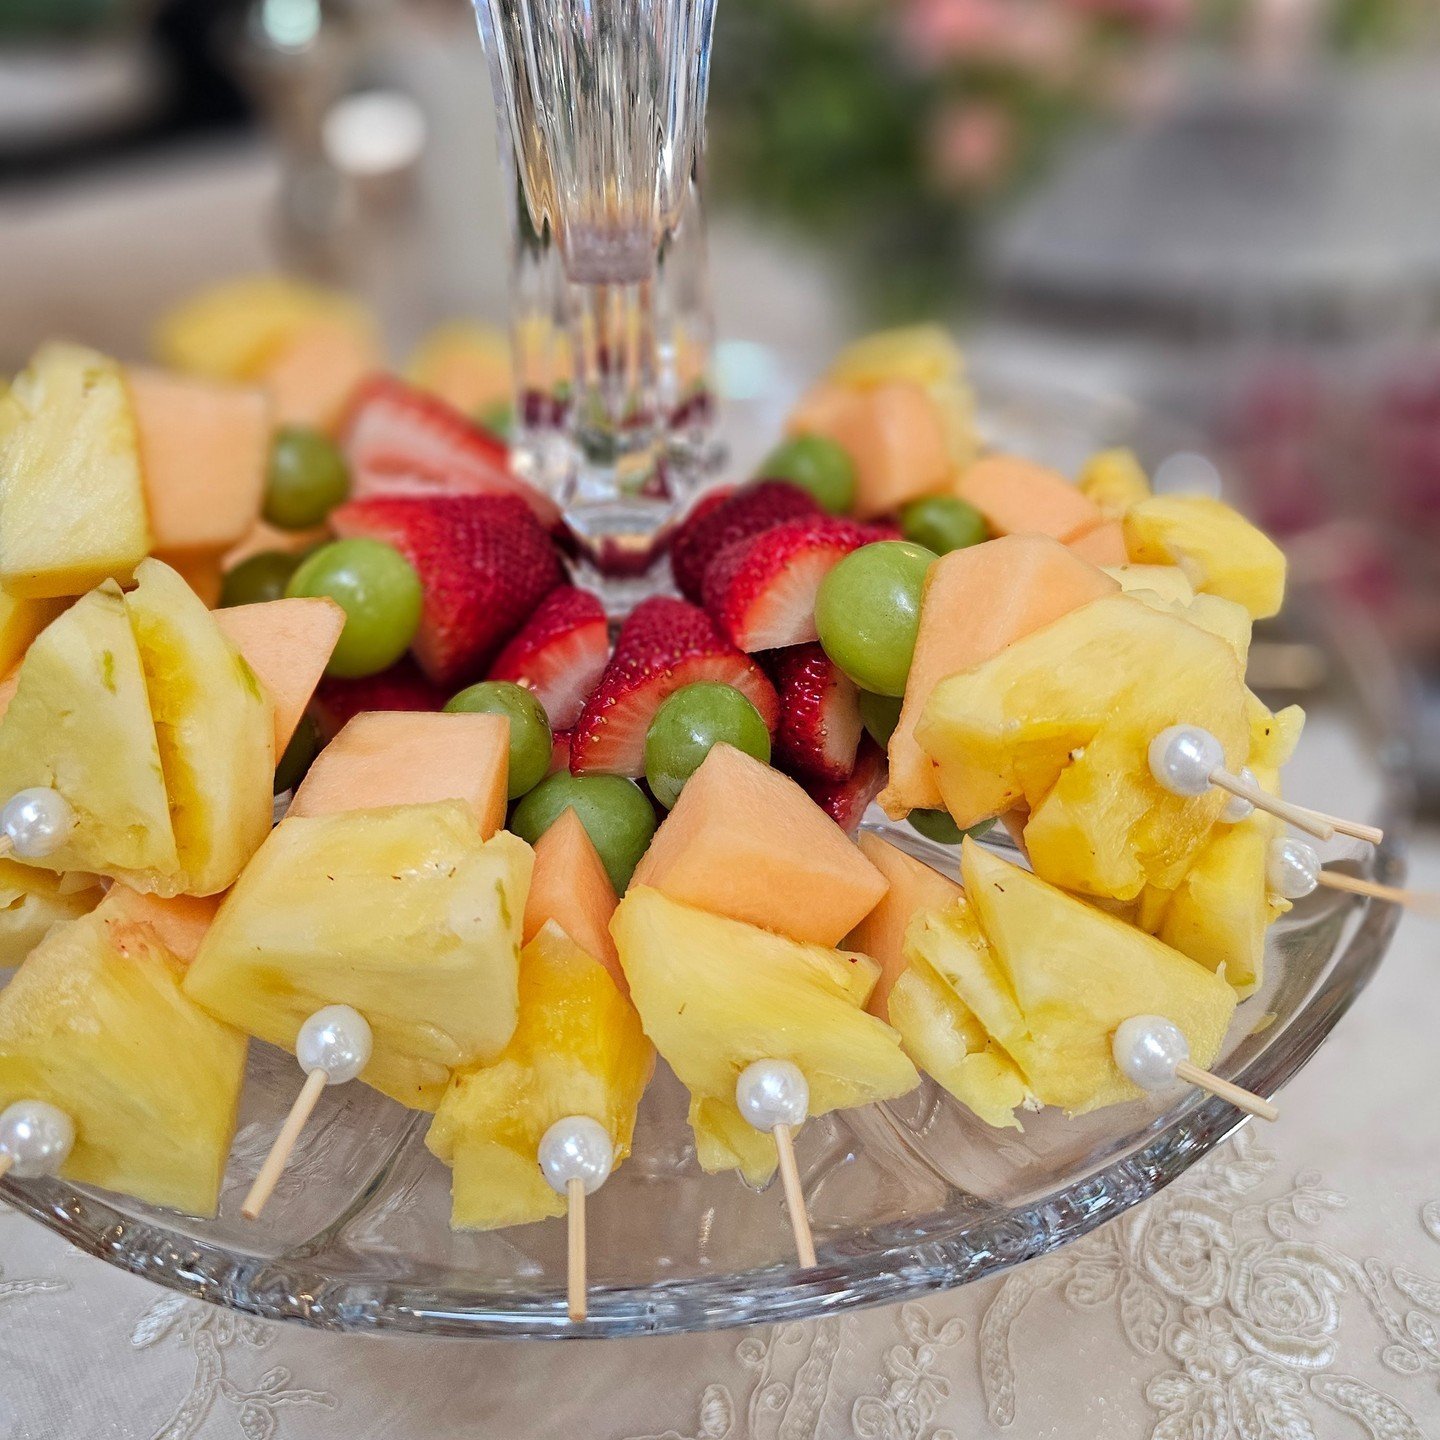 🍓 Satisfy your sweet cravings with the freshest fruits at your next event! From succulent strawberries to juicy watermelon, we prepare the most perfect &amp; delicious fruit platters to add a burst of flavor to your special occasion. 

Elevate your 